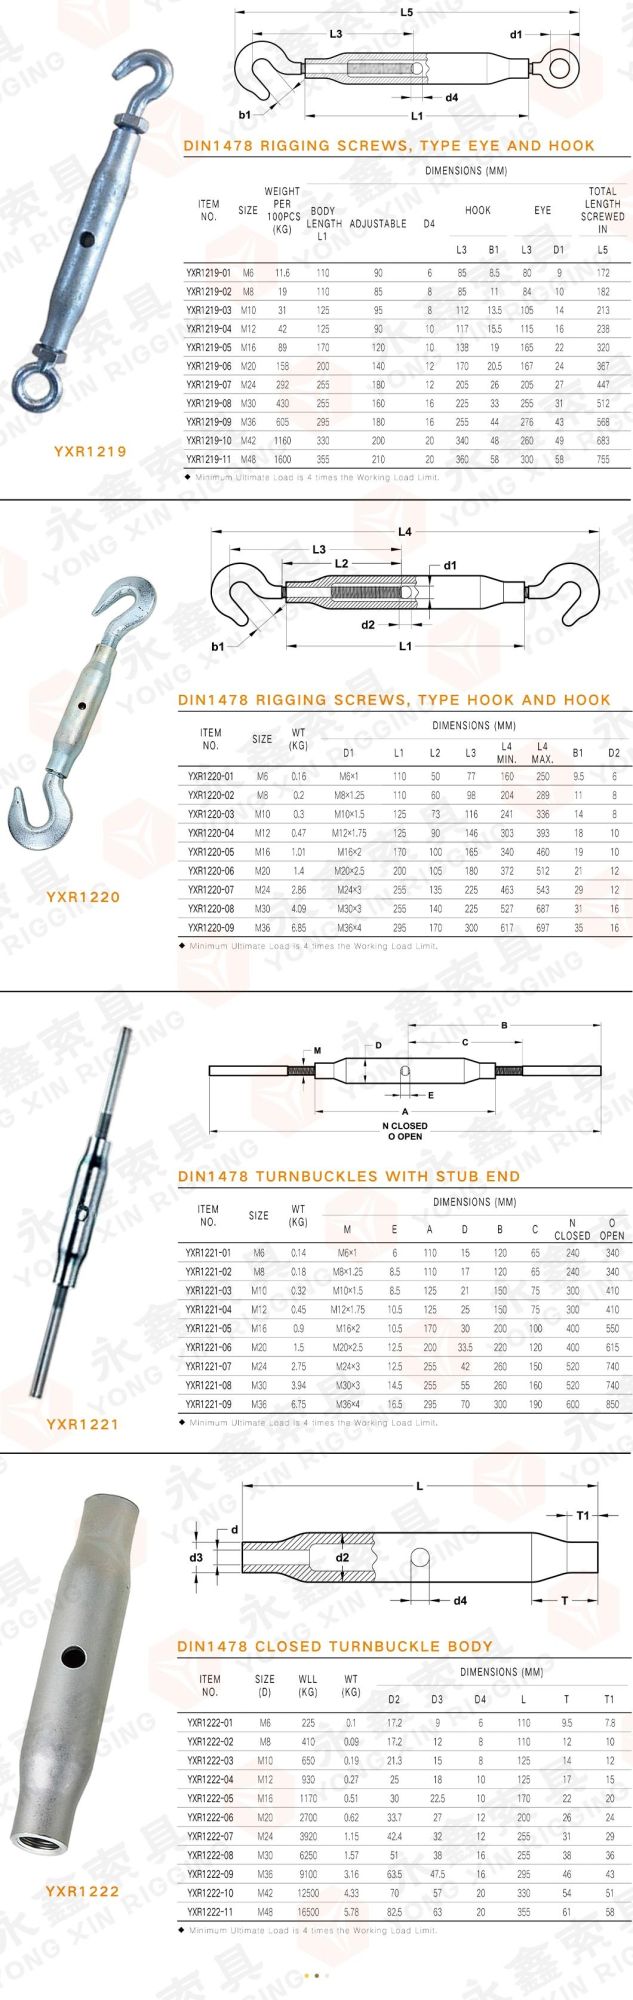 China High Strength European Type Rigging Screw DIN 1478 DIN1478 Carbon Steel Ratchet Close Body Turnbuckle